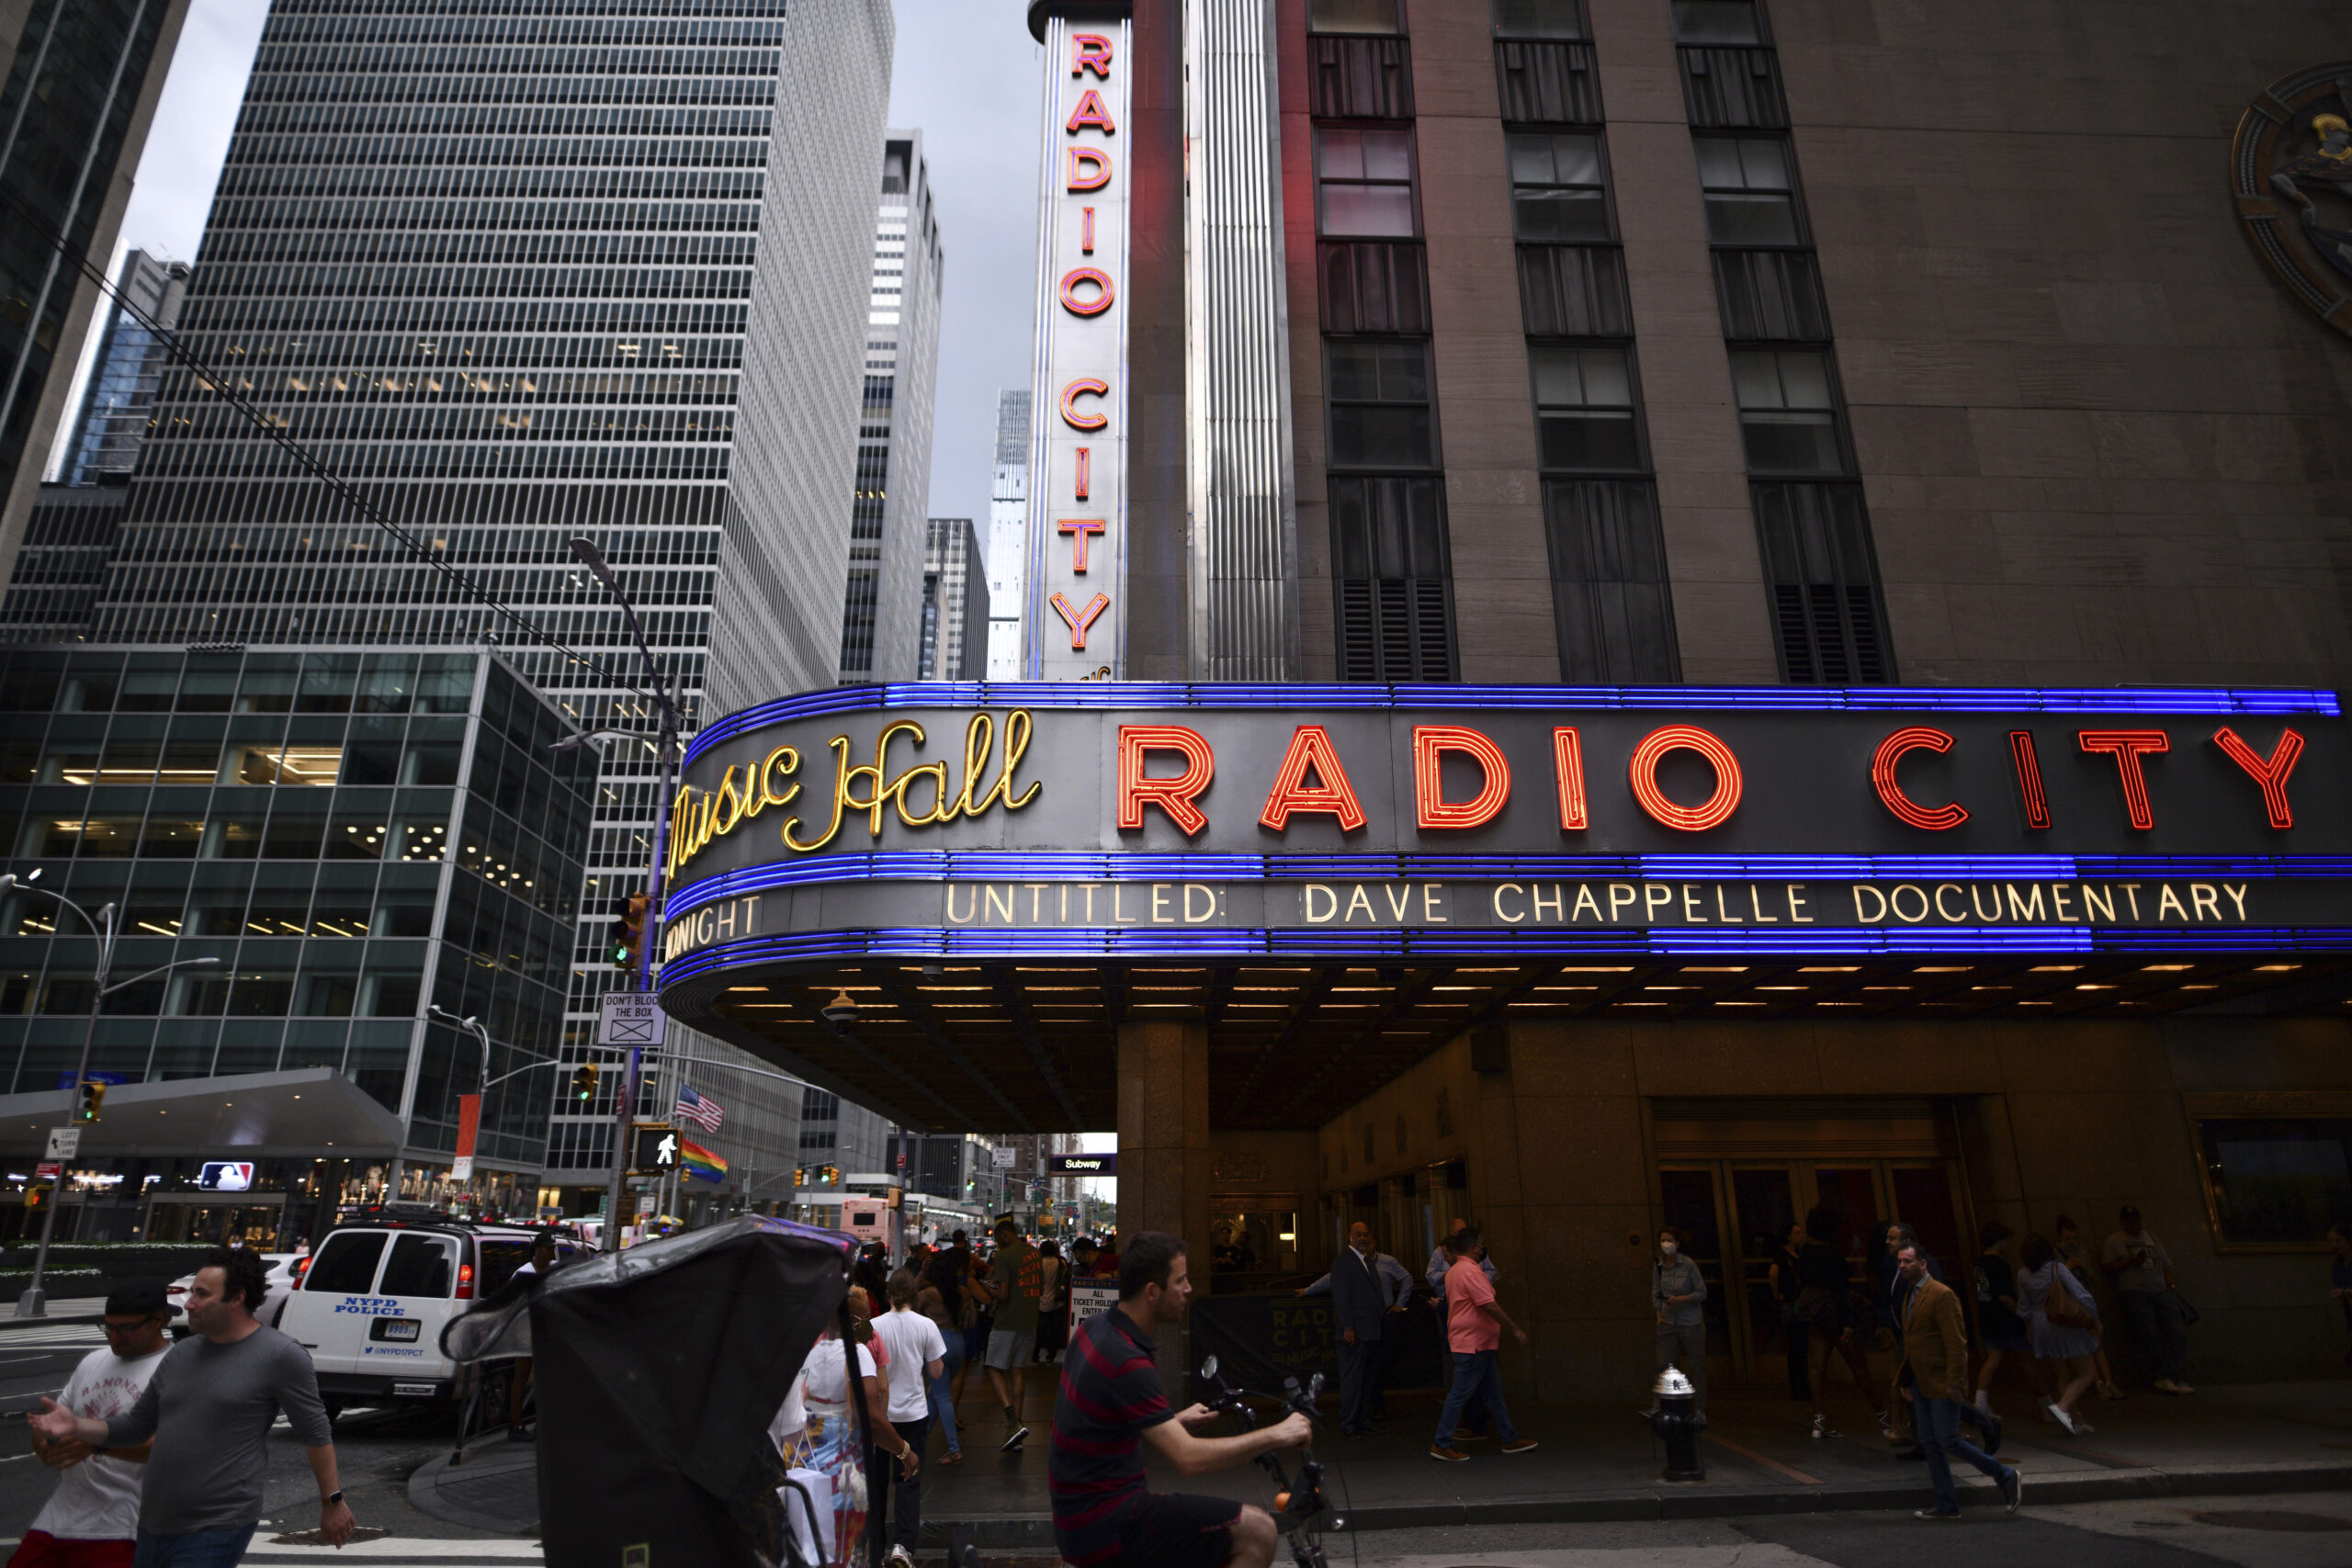 Radio City Music Hall's marquee advertises Dave Chappelle's untitled documentary during the closing night celebration for the 20th Tribeca Festival on Saturday, June 19, 2021, in New York. (Photo by Charles Sykes/Invision/AP)